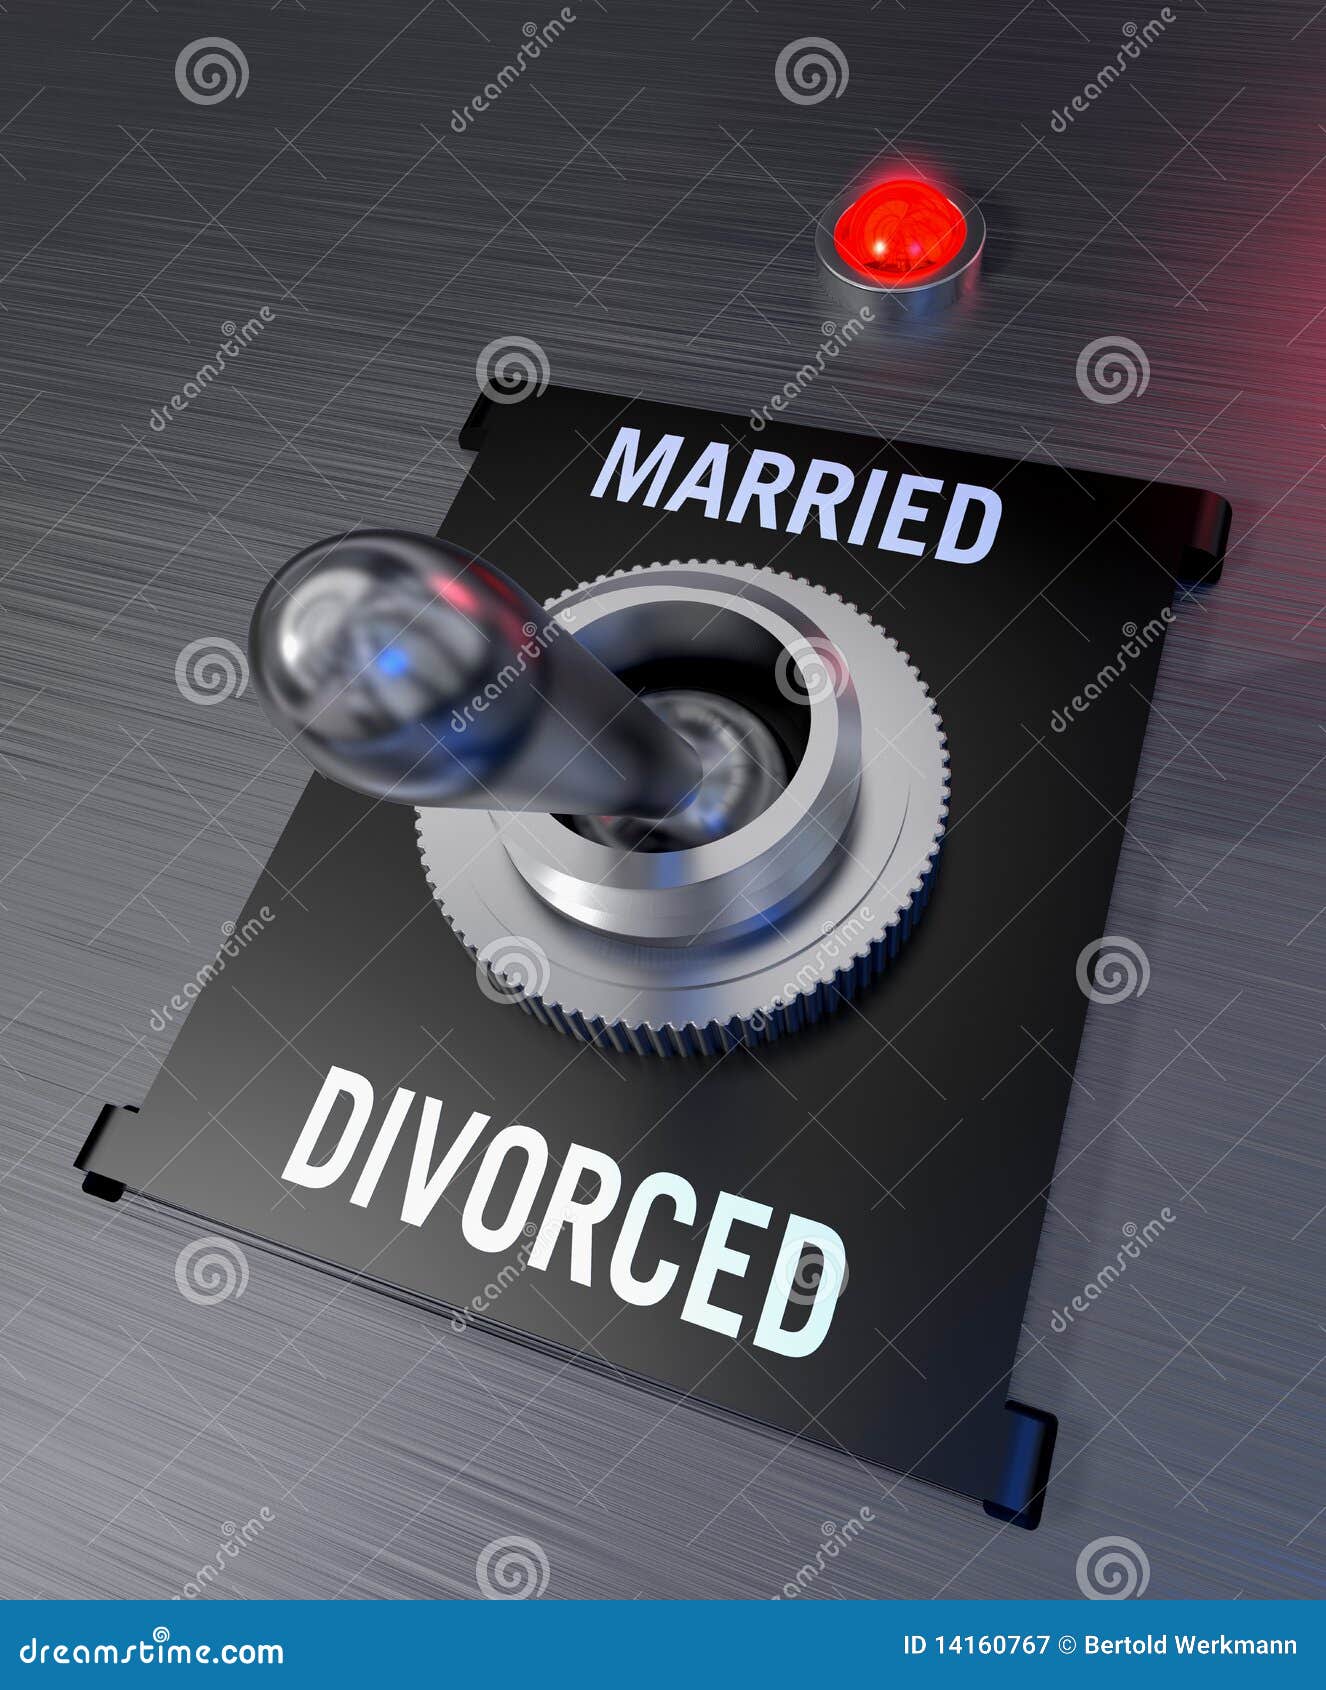 married or divorced